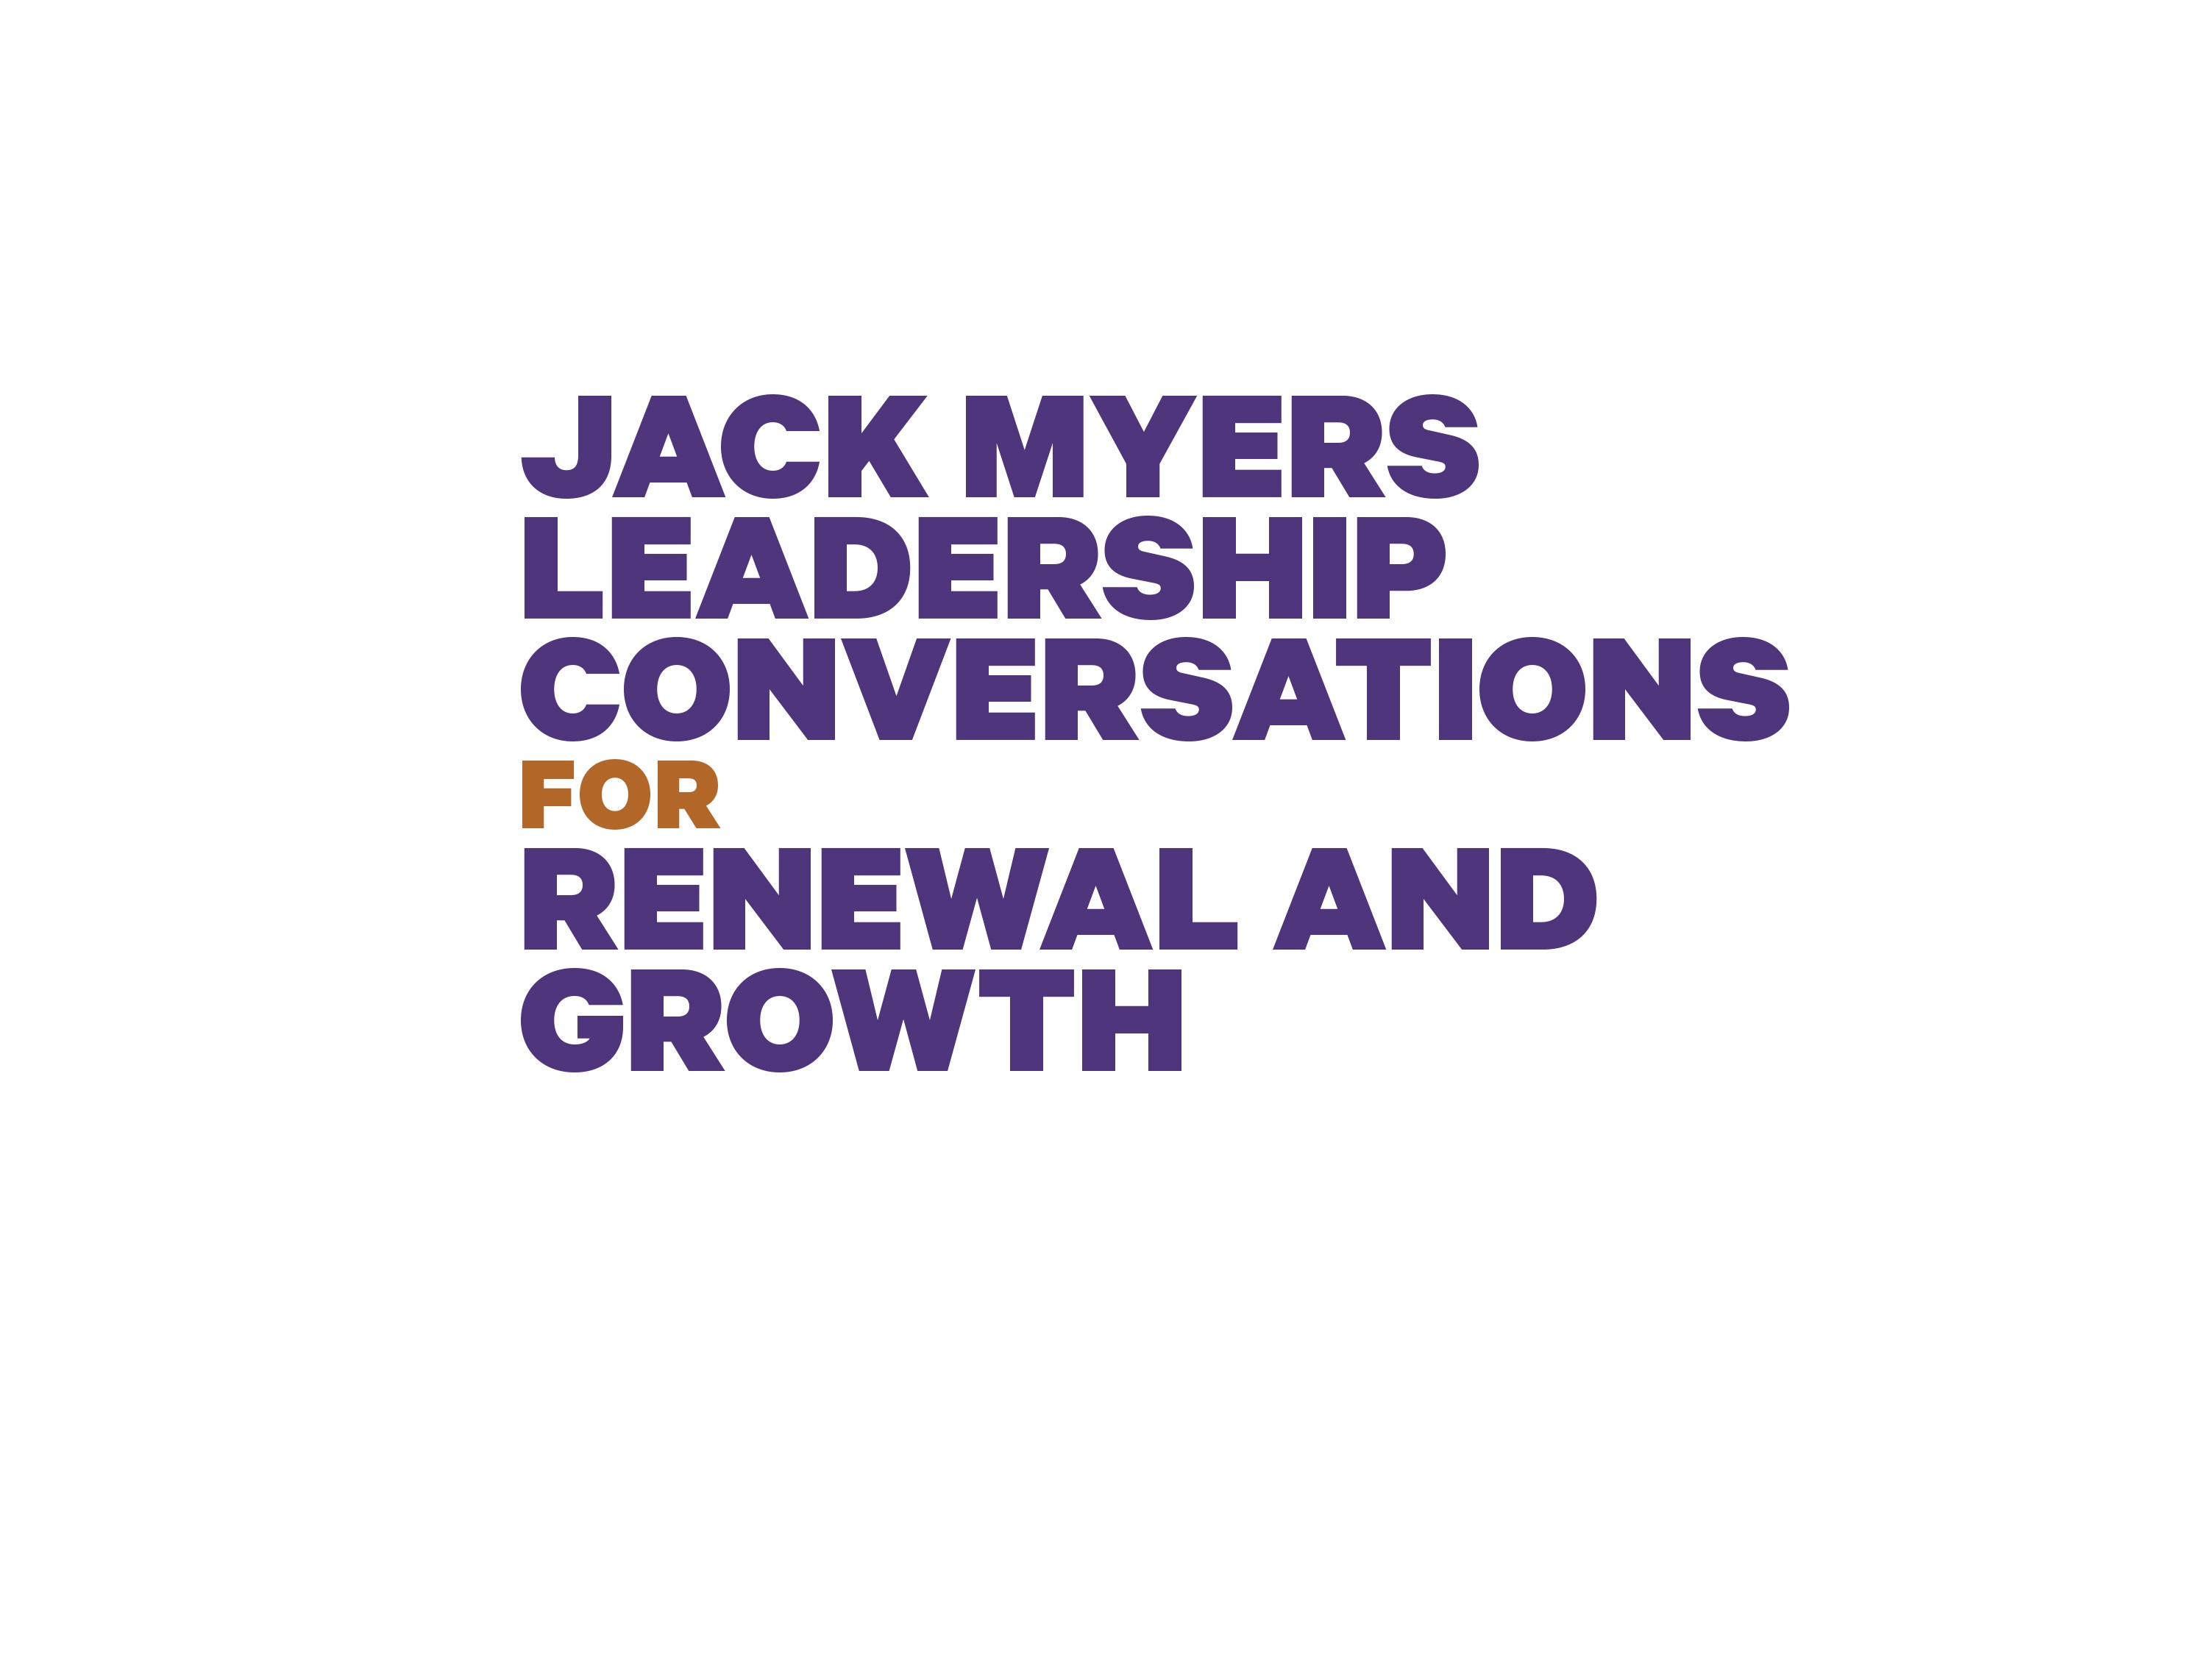 Cover image for  article: MediaVillage Founder Jack Myers Announces Latest Slate of  "Leadership Conversations for Renewal and Growth" and Recipients of COVID-19 Relief Funds for Media/Advertising Non-Profit Organizations and Diversity Initiatives